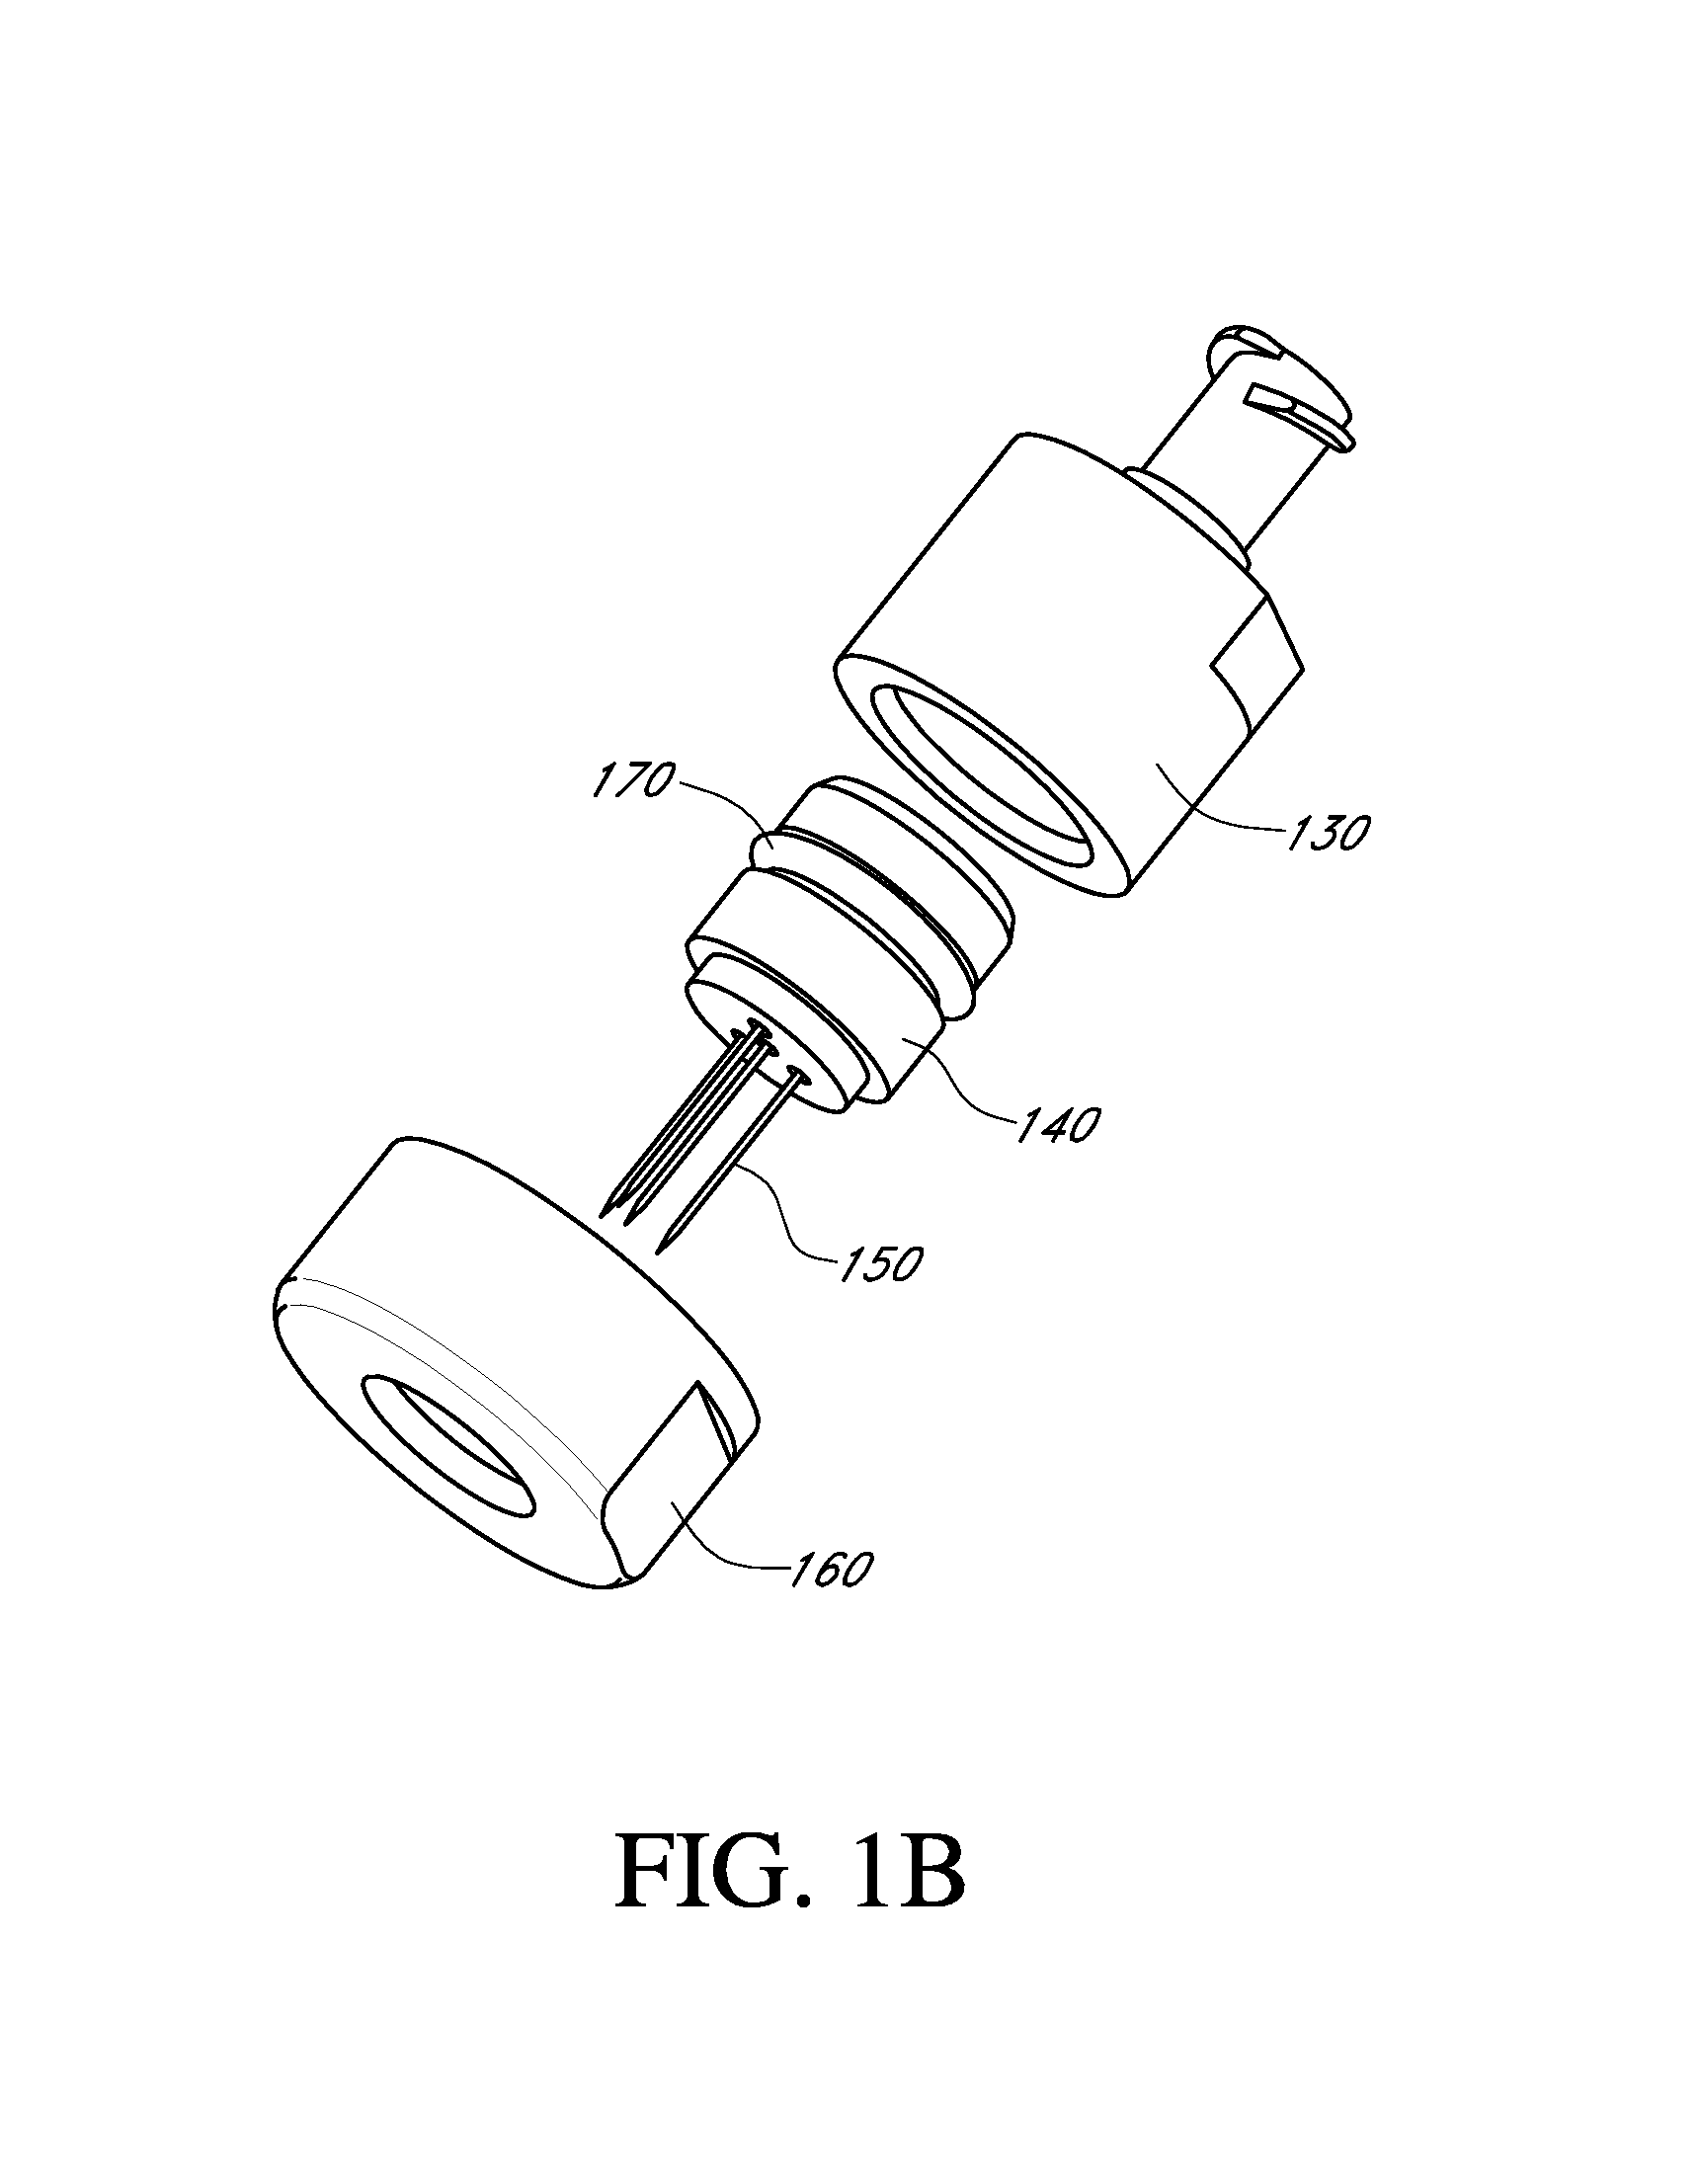 Injection needle and device